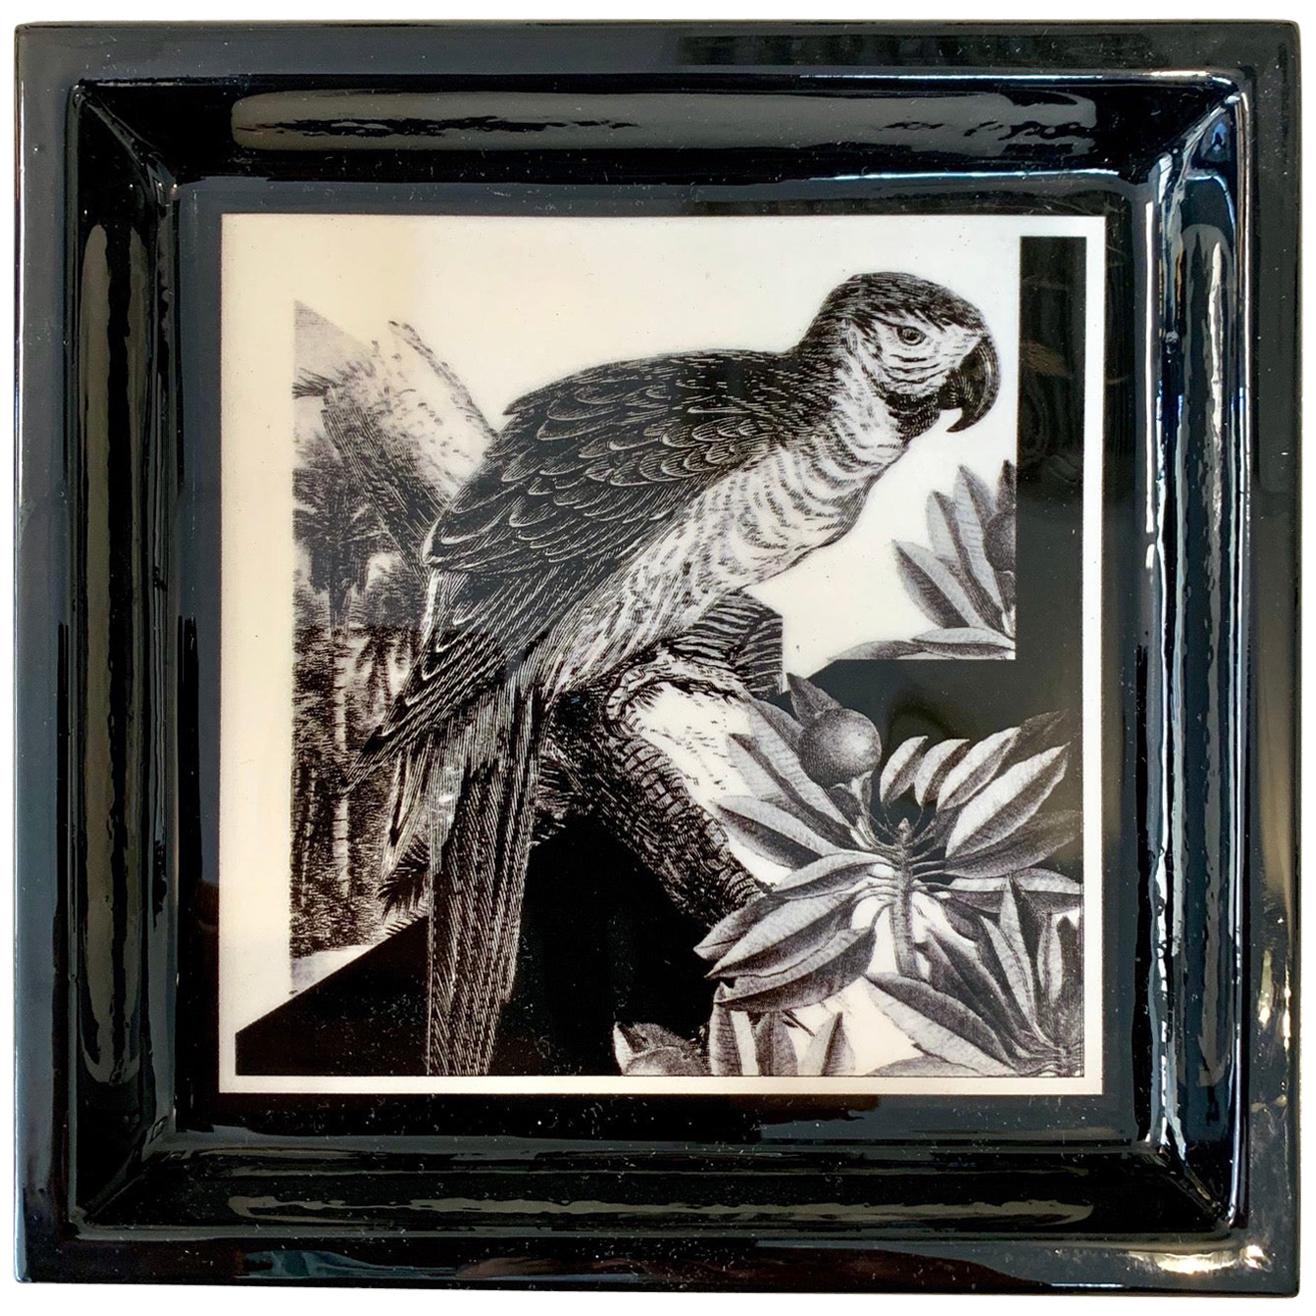 Italian Contemporary "Black and Wild" Collection Parrot Resin Pocket Tray For Sale